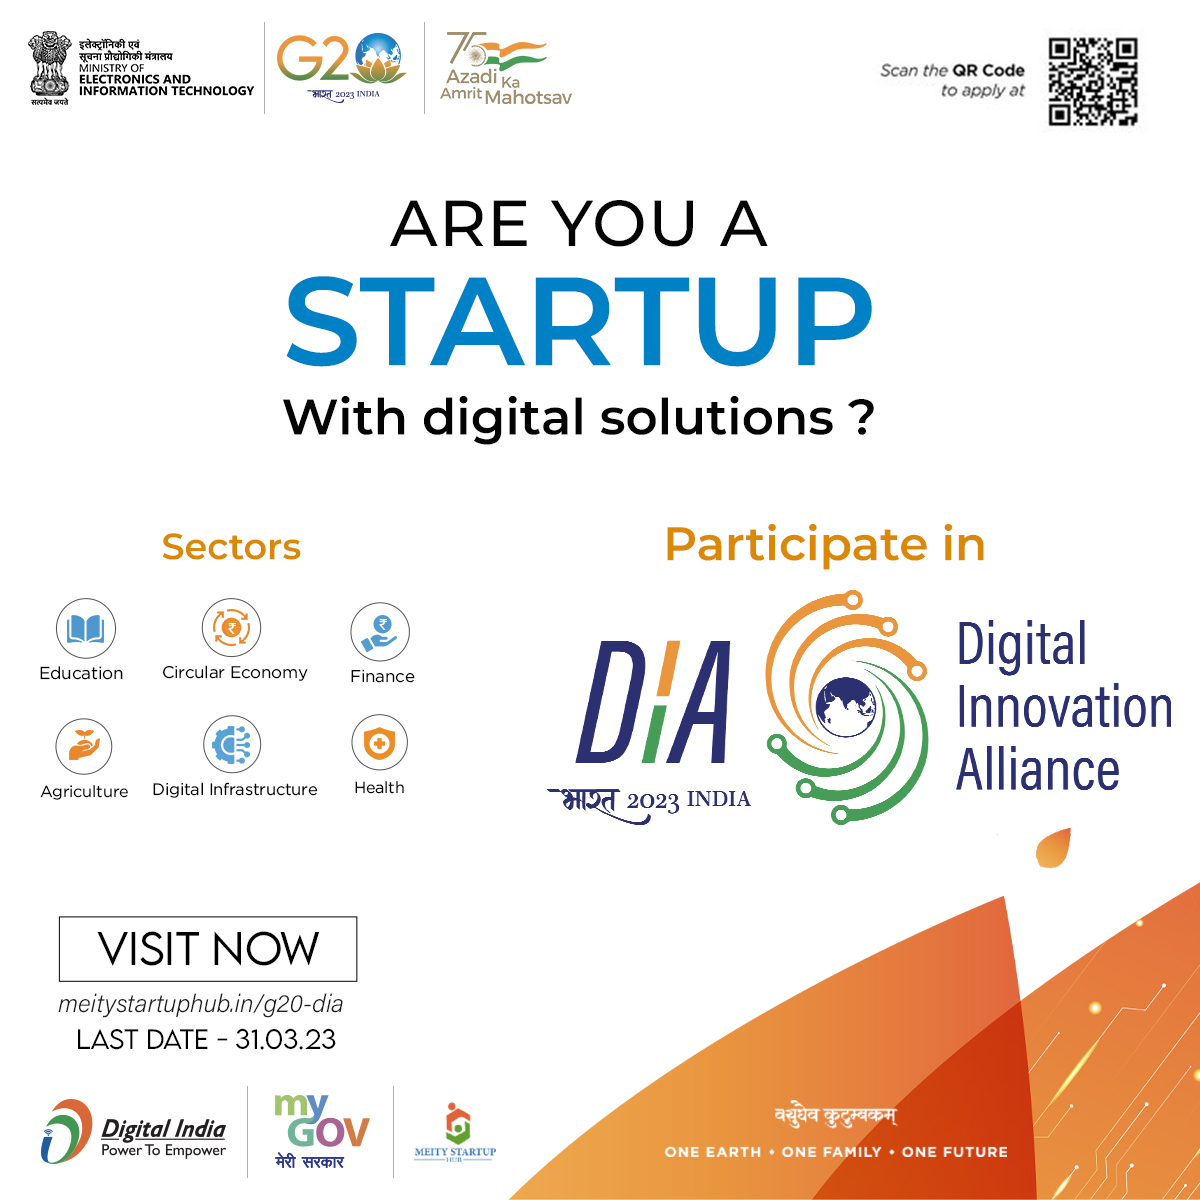 Participate in #Digital Innovation Alliance by MeitY Startup Hub #india #startup G20-DIA G20 India